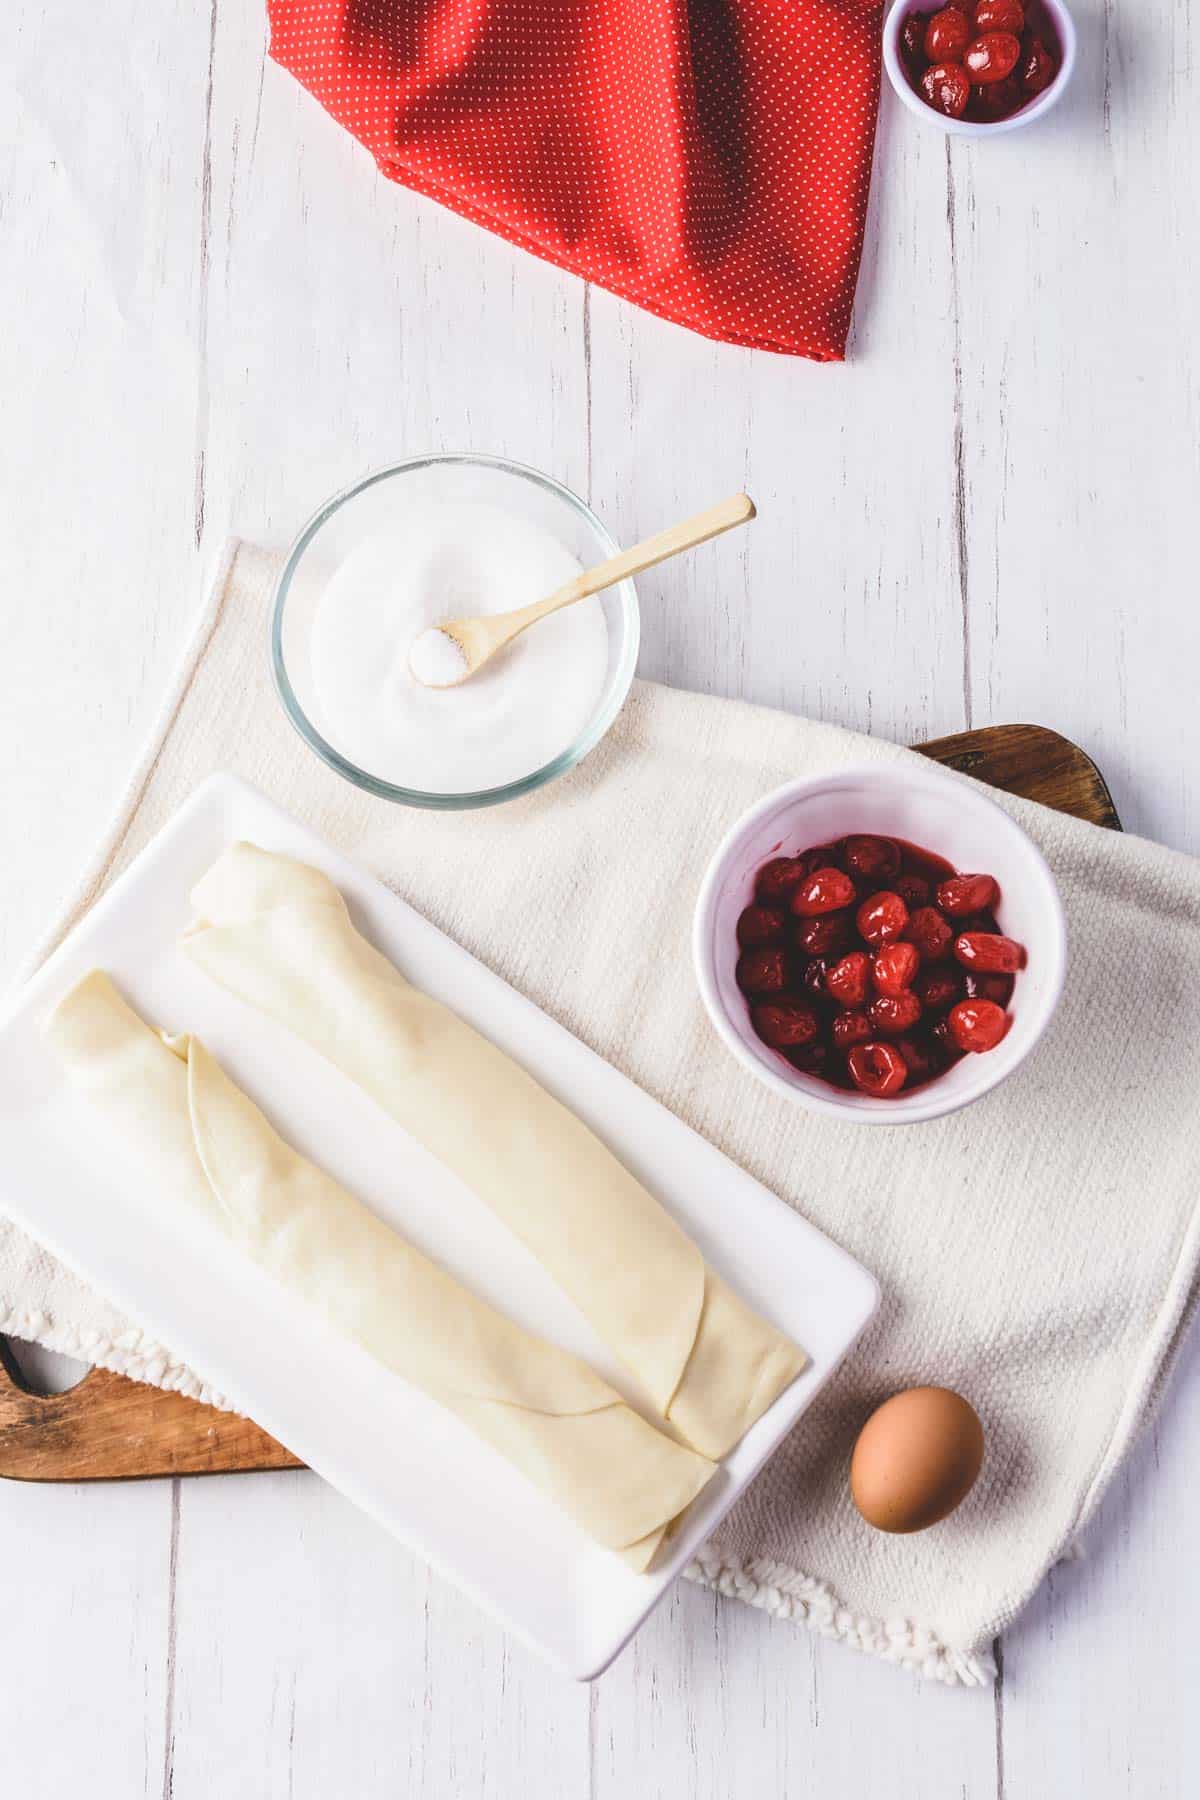 Ingredients needed for air fryer cherry hand pies - pie crust, cherry pie filling, egg, sugar and water.